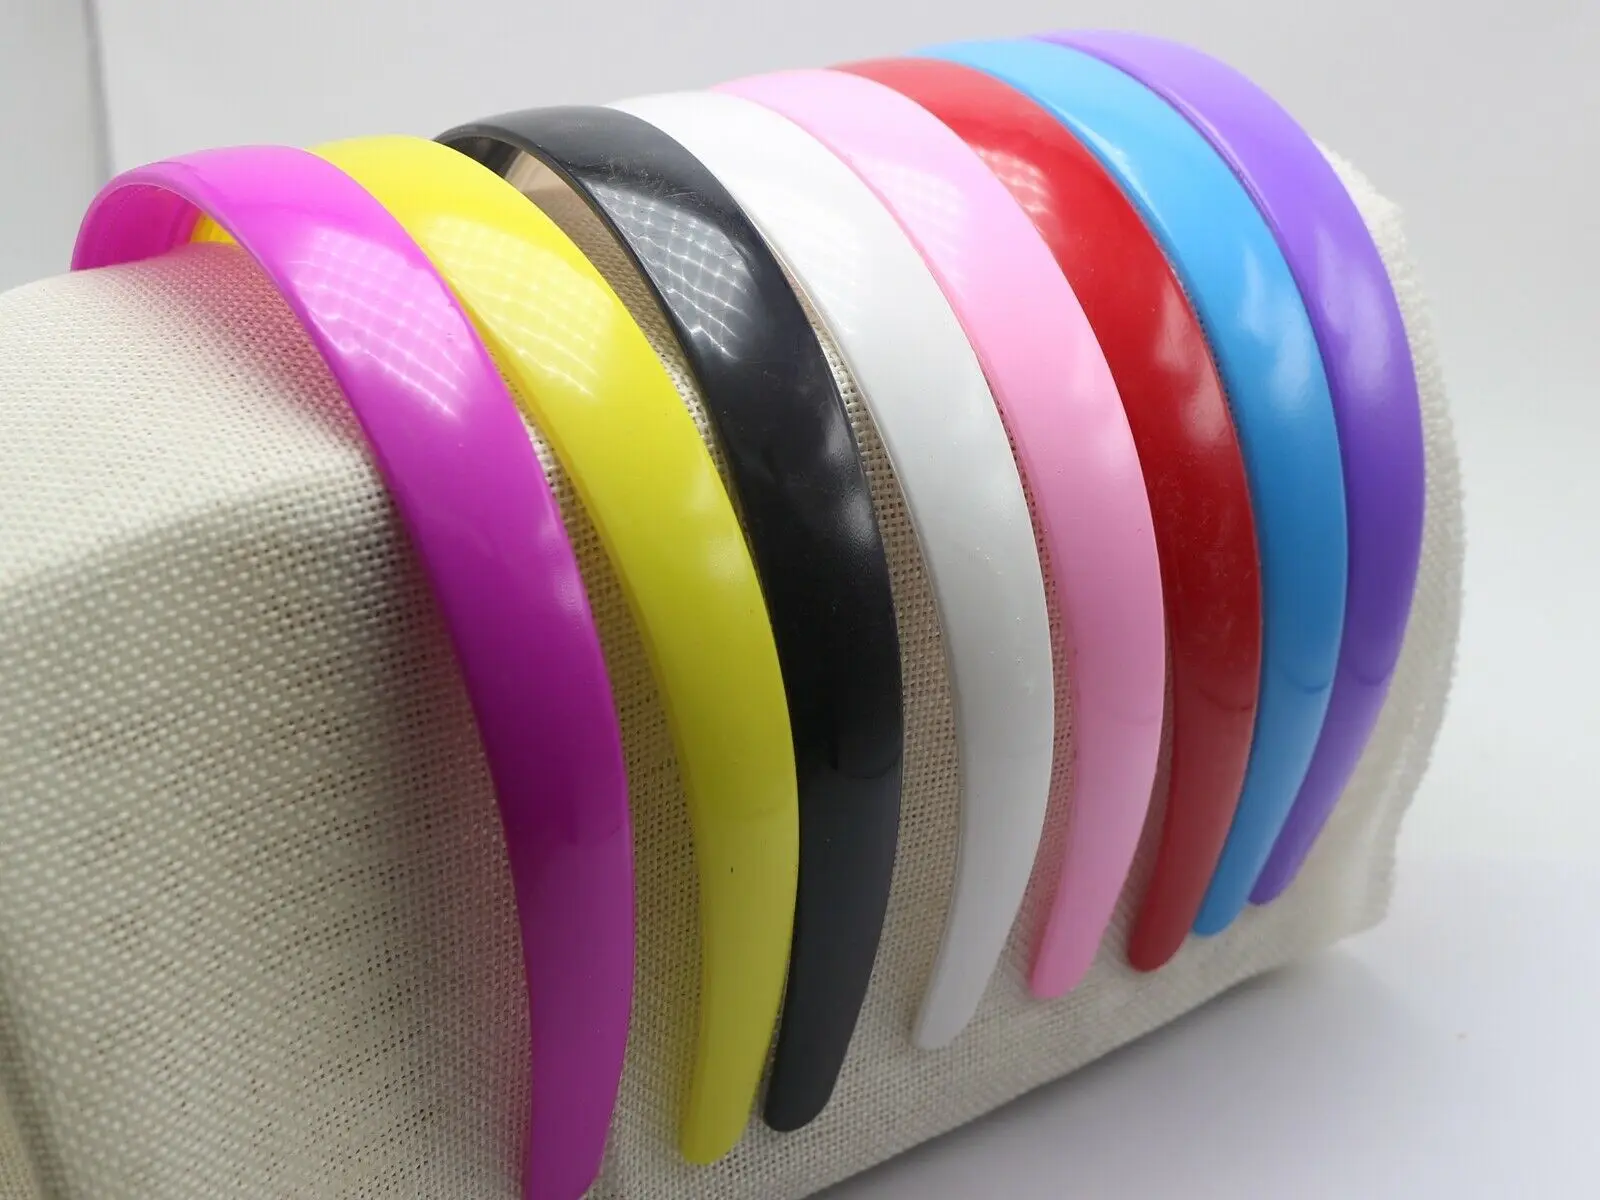 6 Pcs Plastic Wide Alice Hair Band Headbands 20mm(3/4") Hair Accessories